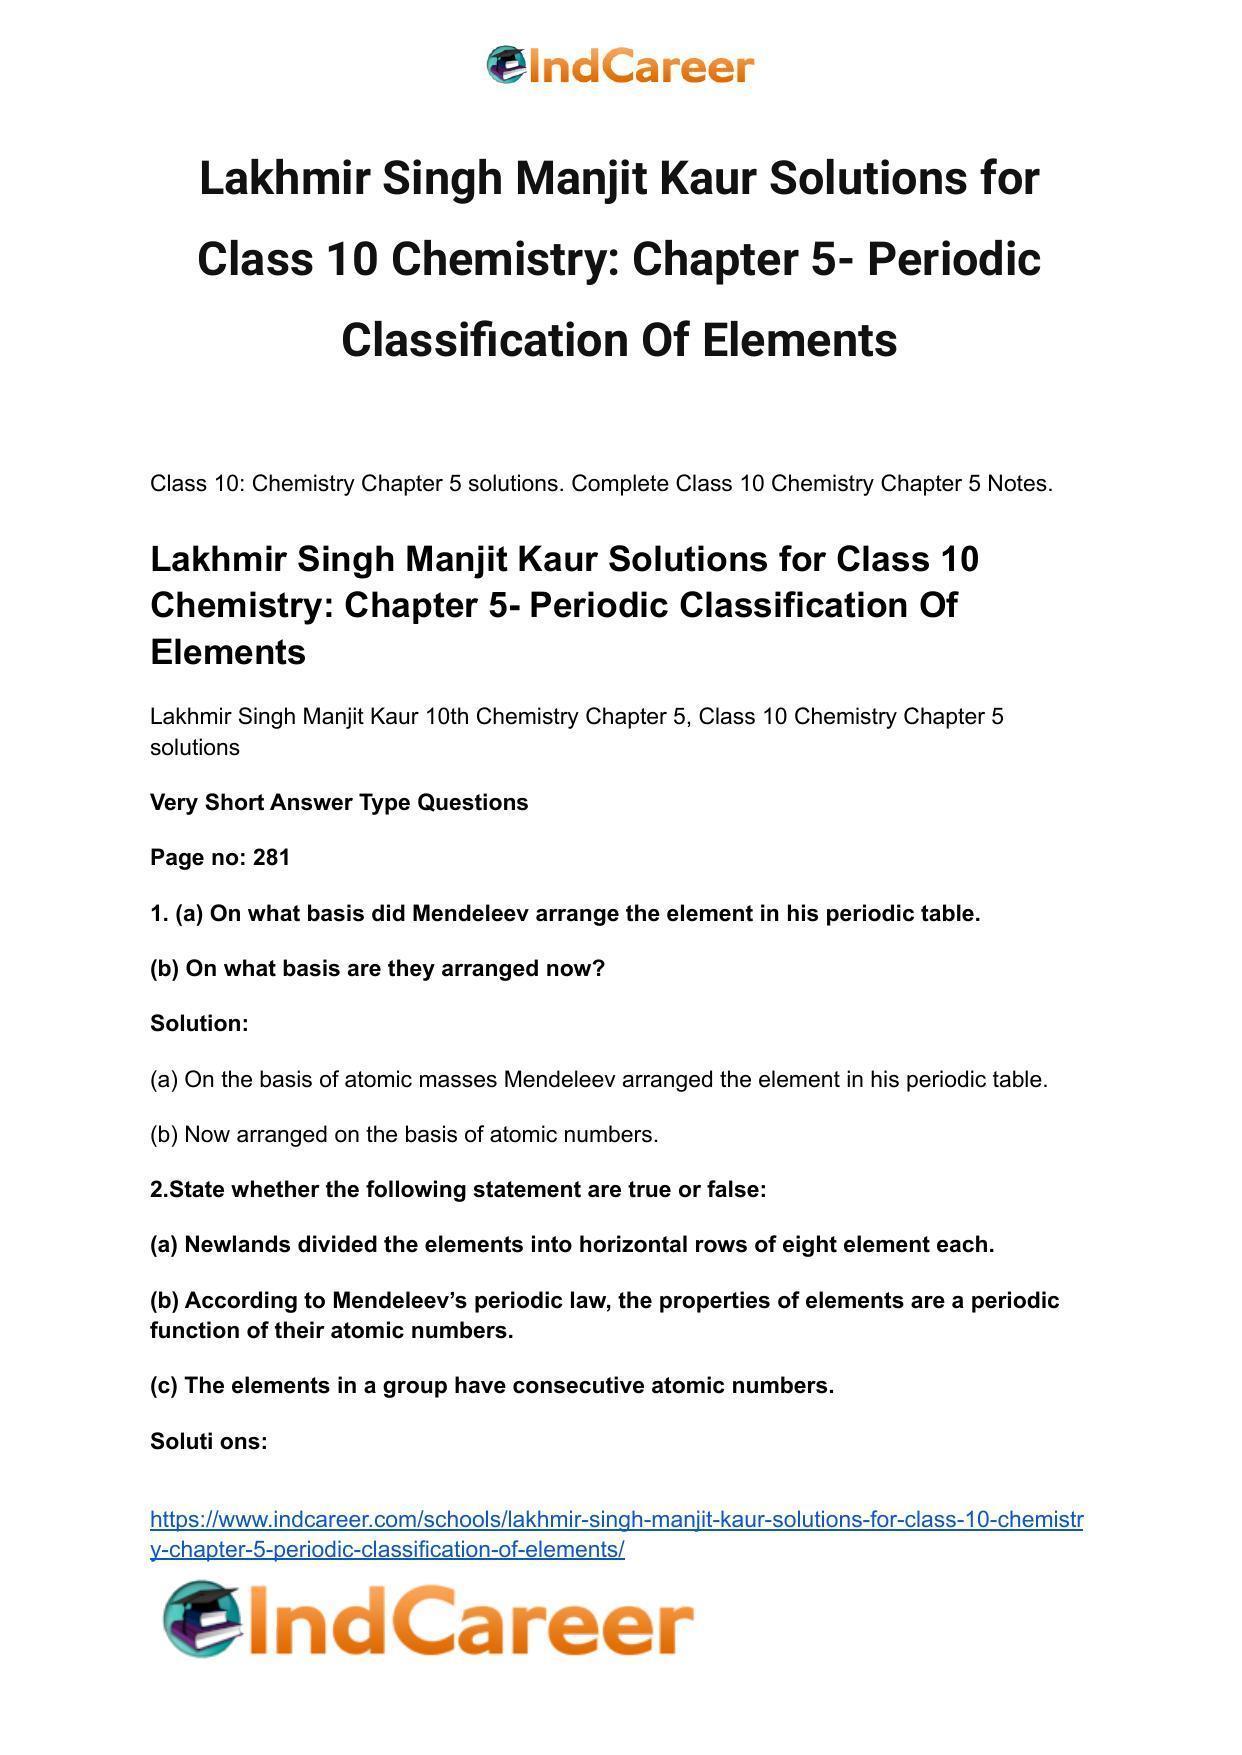 Lakhmir Singh Manjit Kaur  Solutions for Class 10 Chemistry: Chapter 5- Periodic Classification Of Elements - Page 2